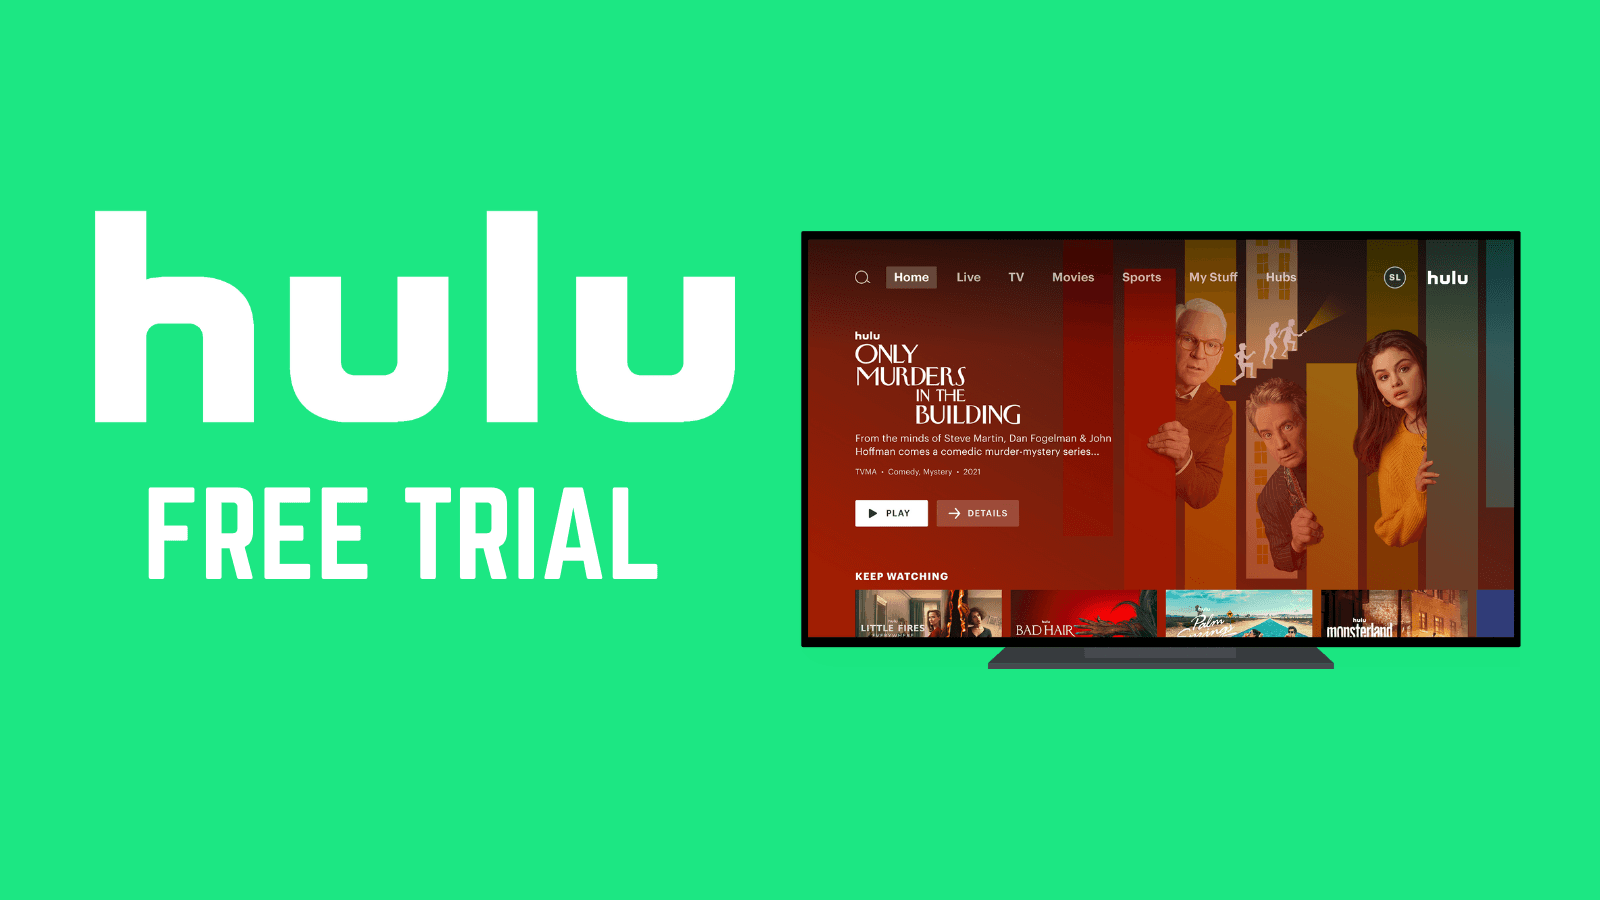 With the free trial you could try out a free Hulu Plus account for 30 days.